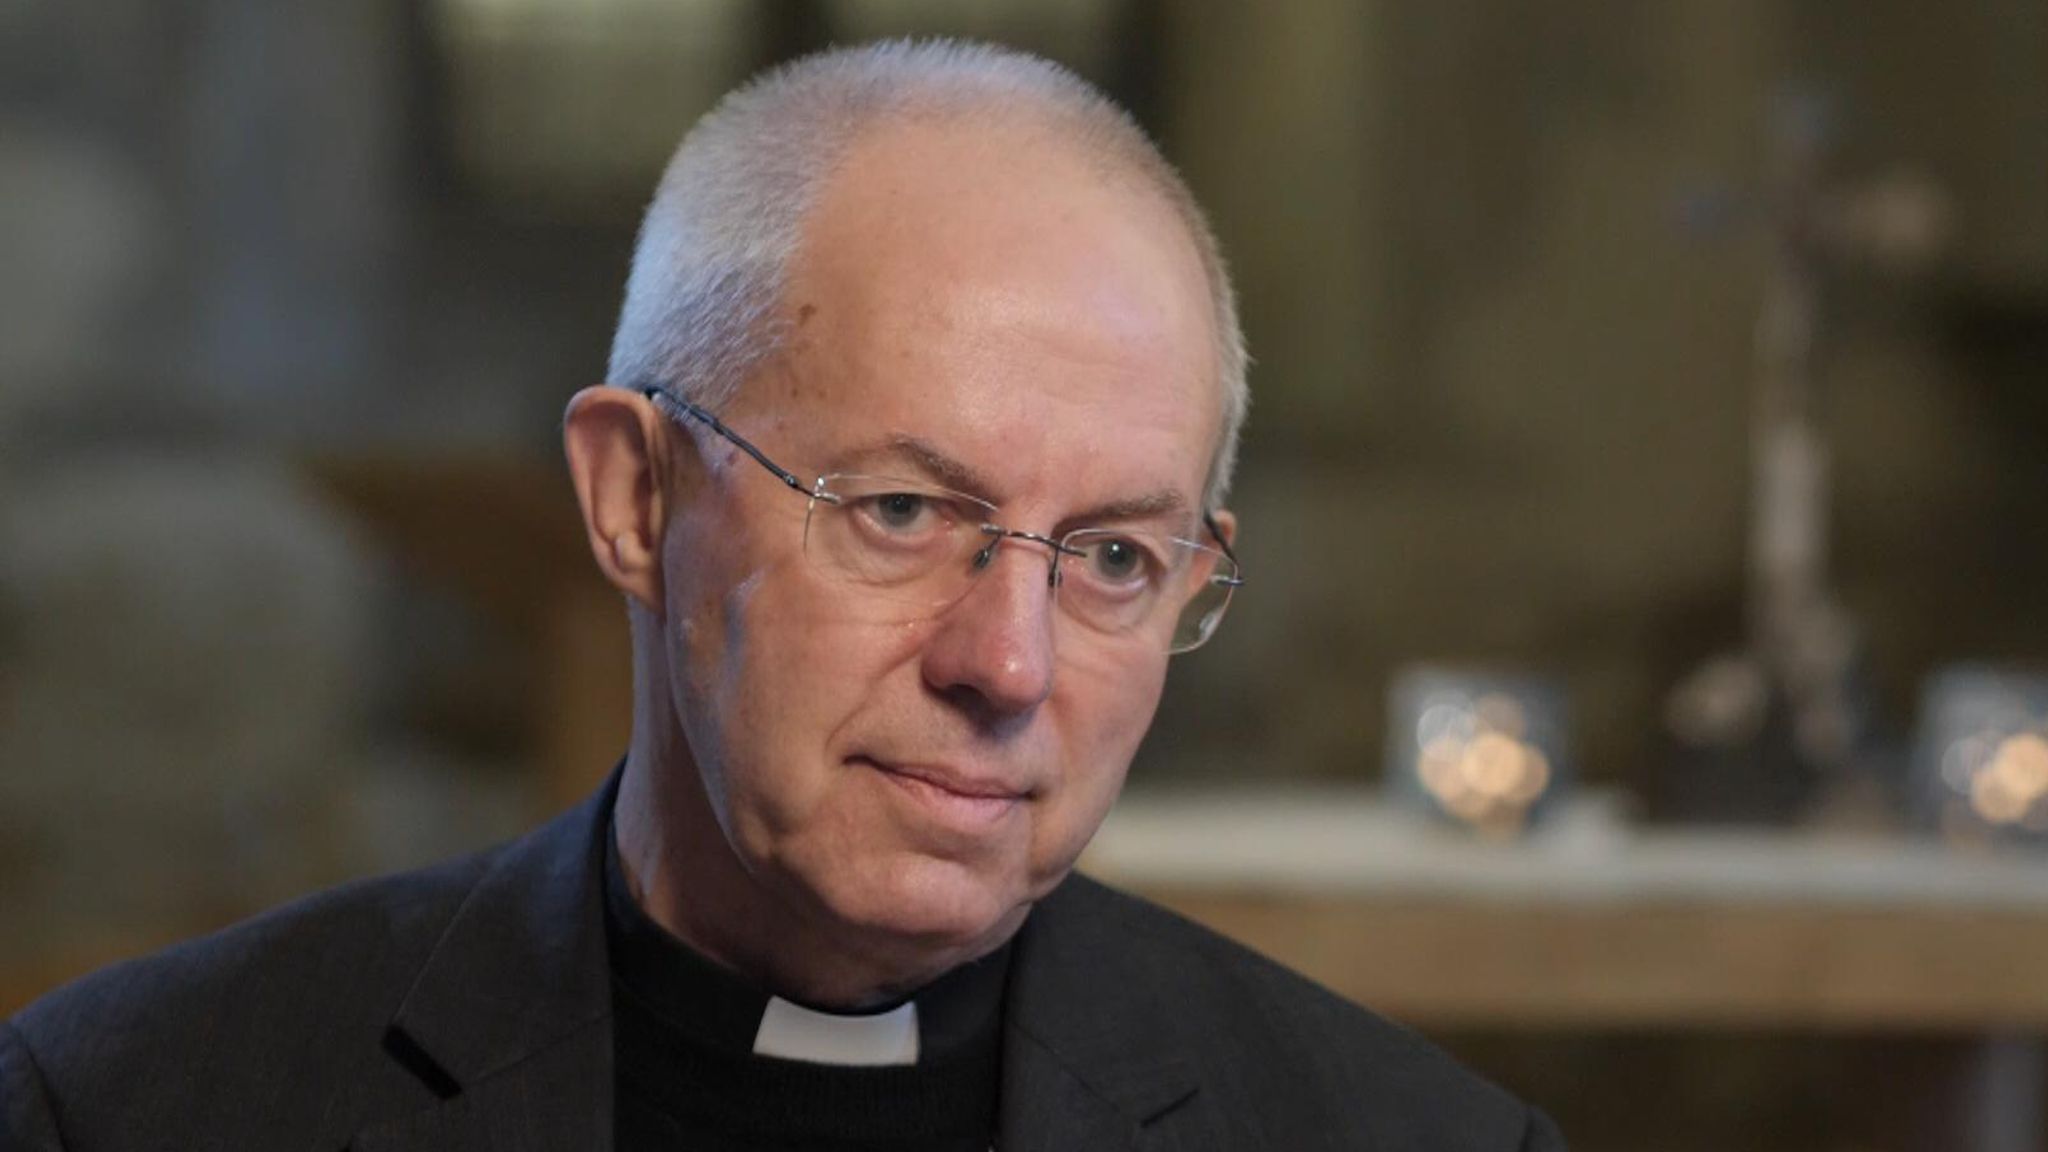 I won't retract statement on Bishop Bell, says Archbishop Welby